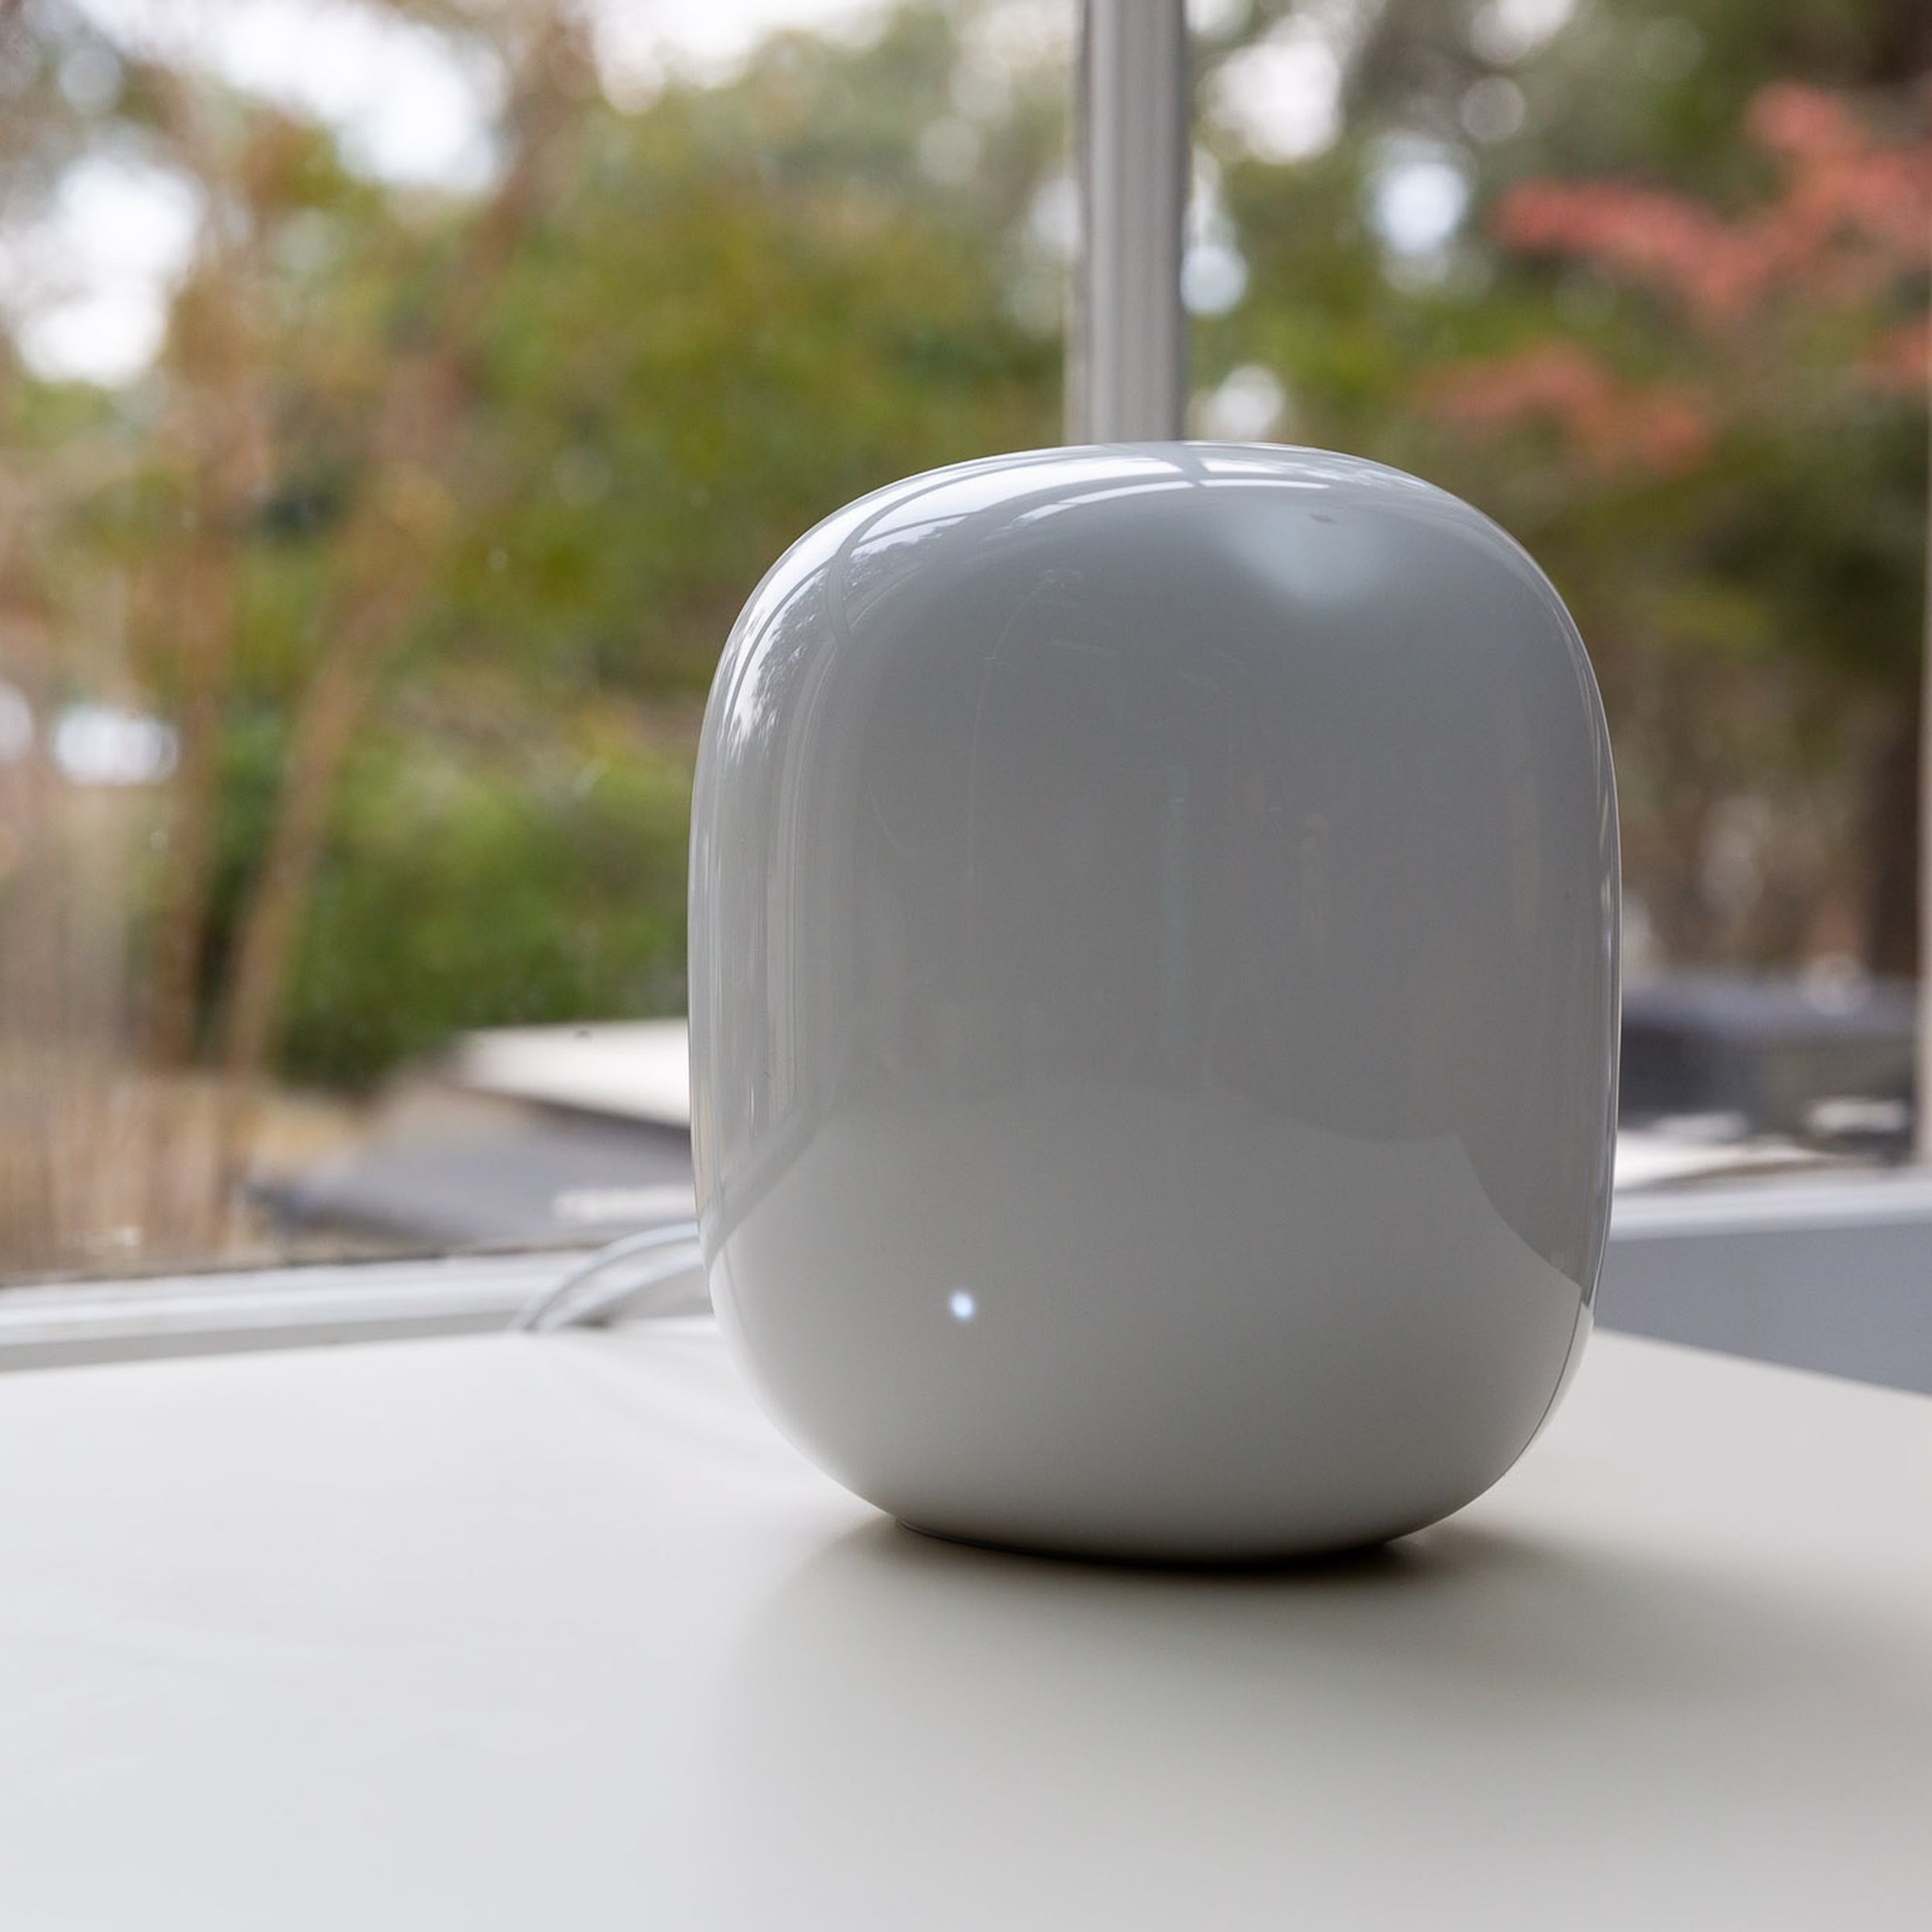 White Google Nest Wifi Pro router on a white table in front of a window.